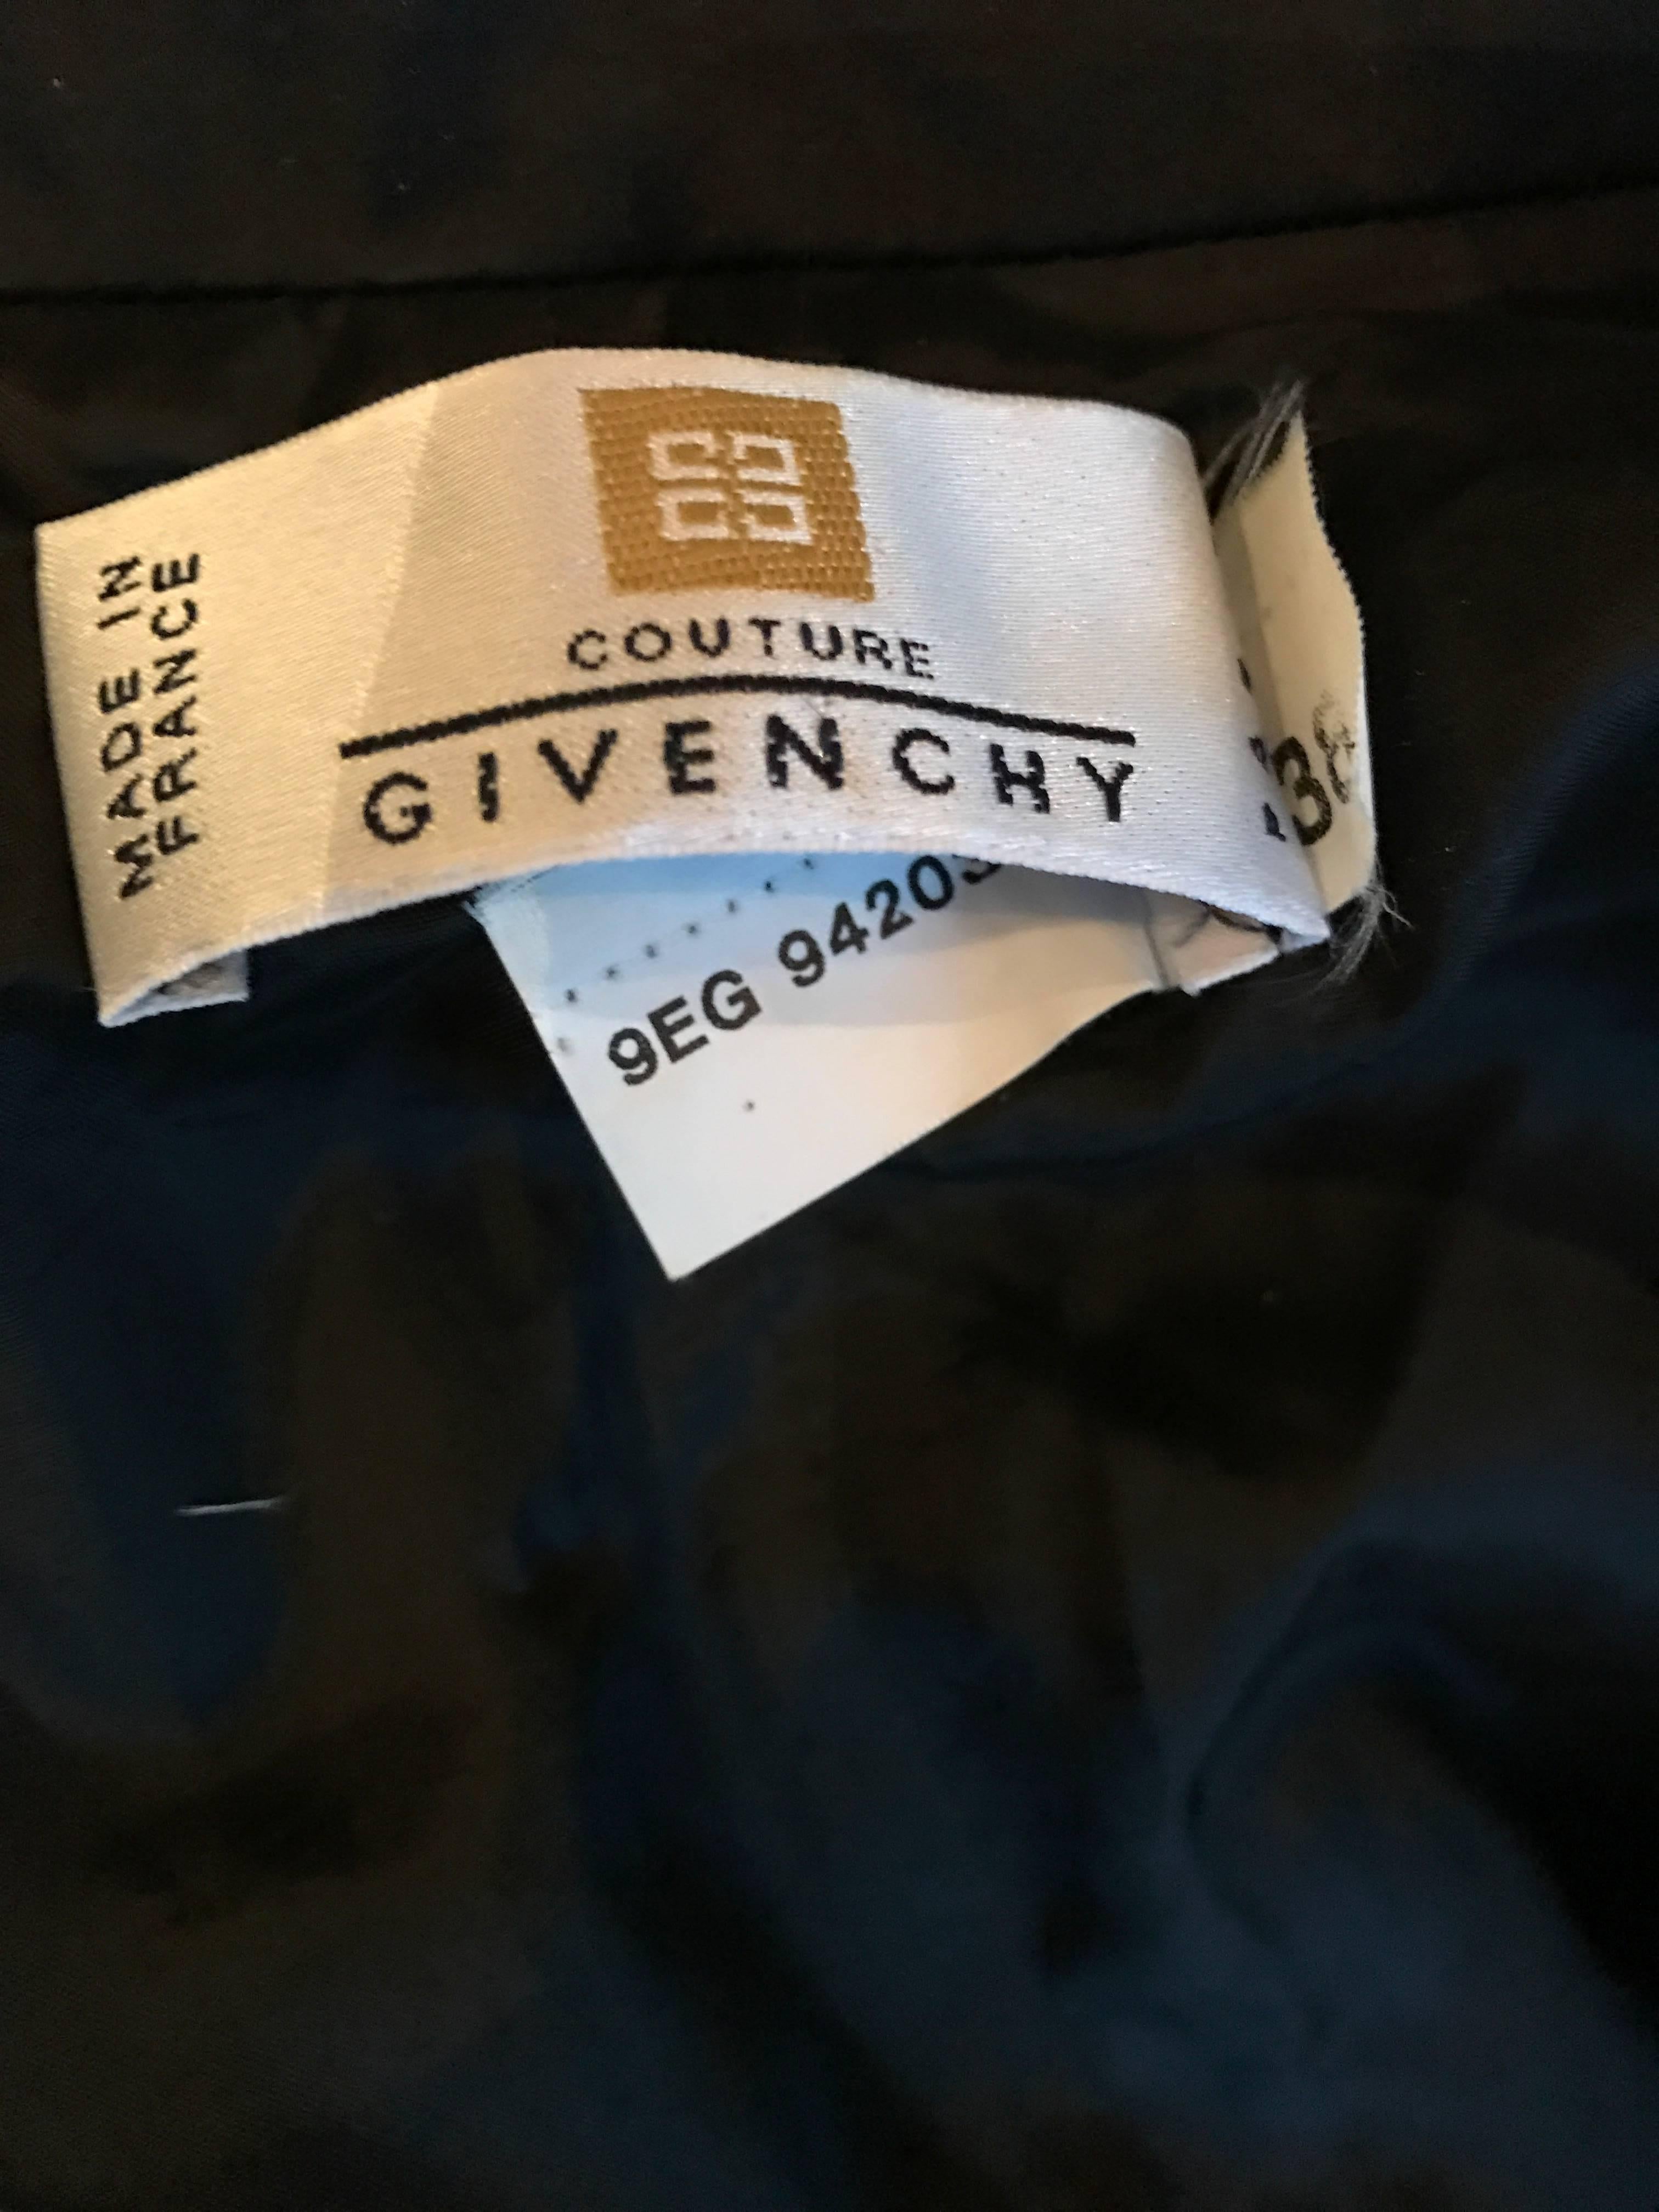 Givenchy Couture By Alexander McQueen 1990s Black and White Shirt Dress Size 38 6